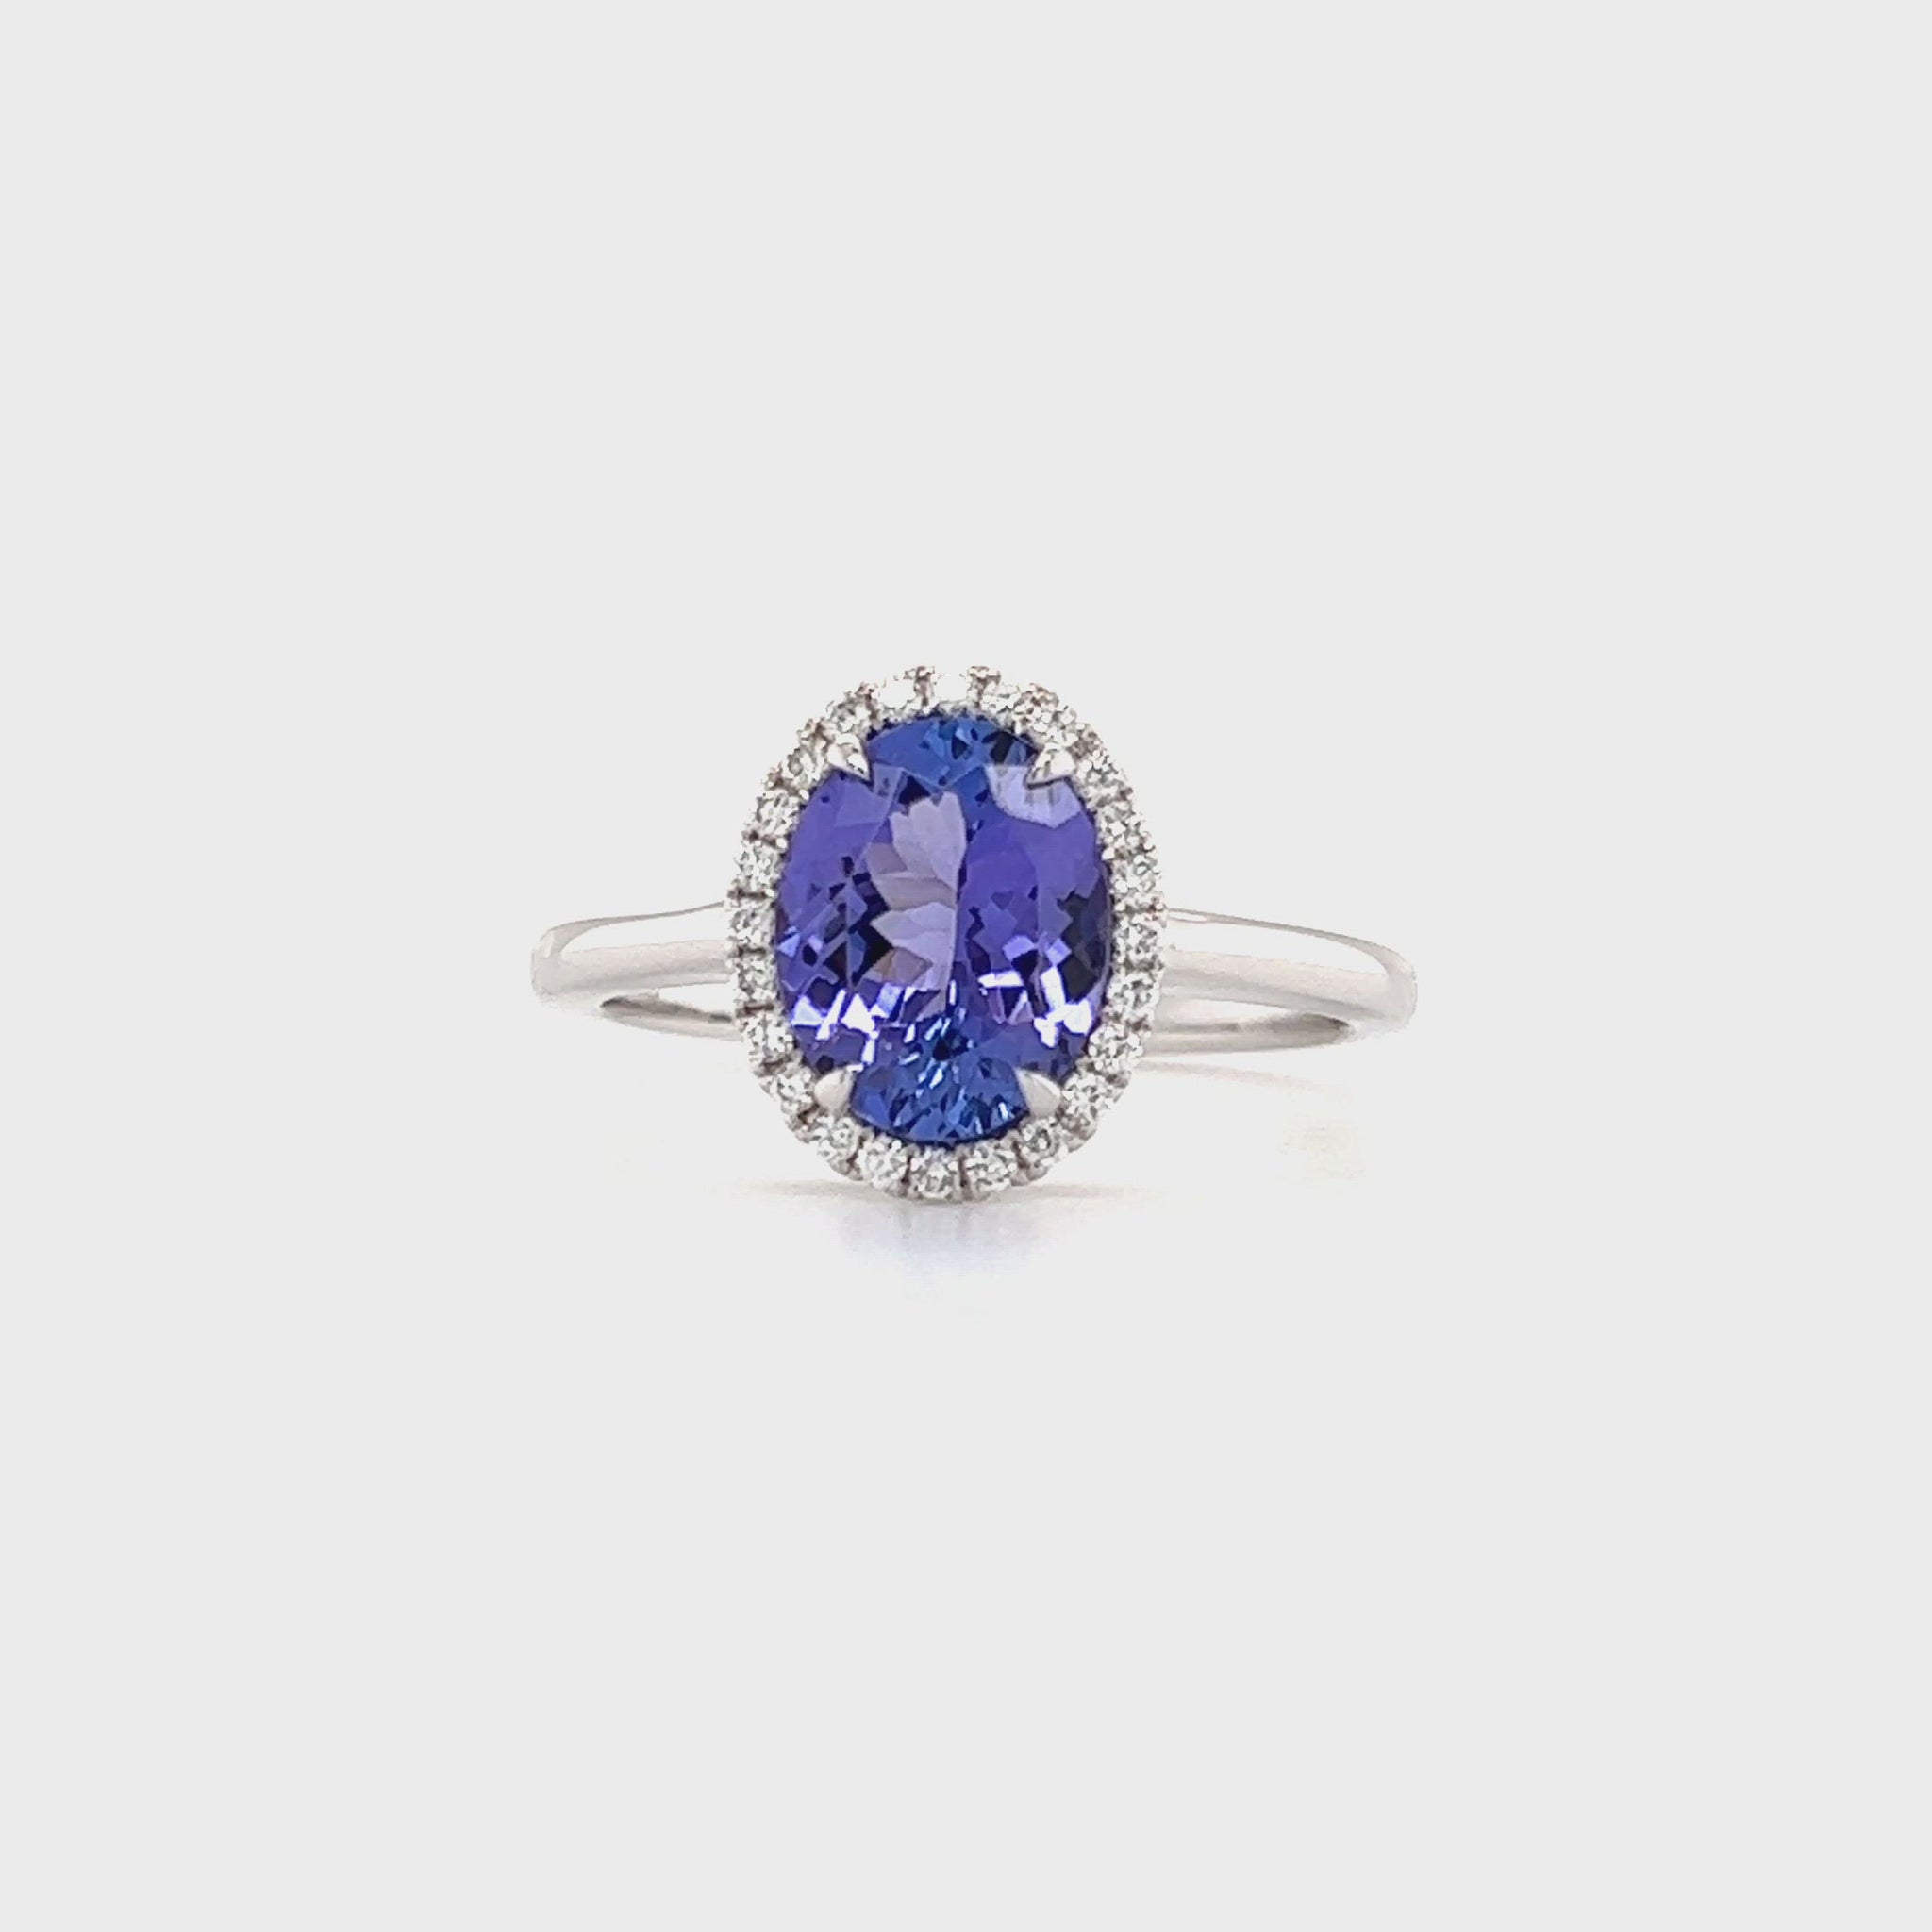 Oval Tanzanite Ring with 1.75ctw of Tanzanite and Diamond Halo in 14K White Gold Video